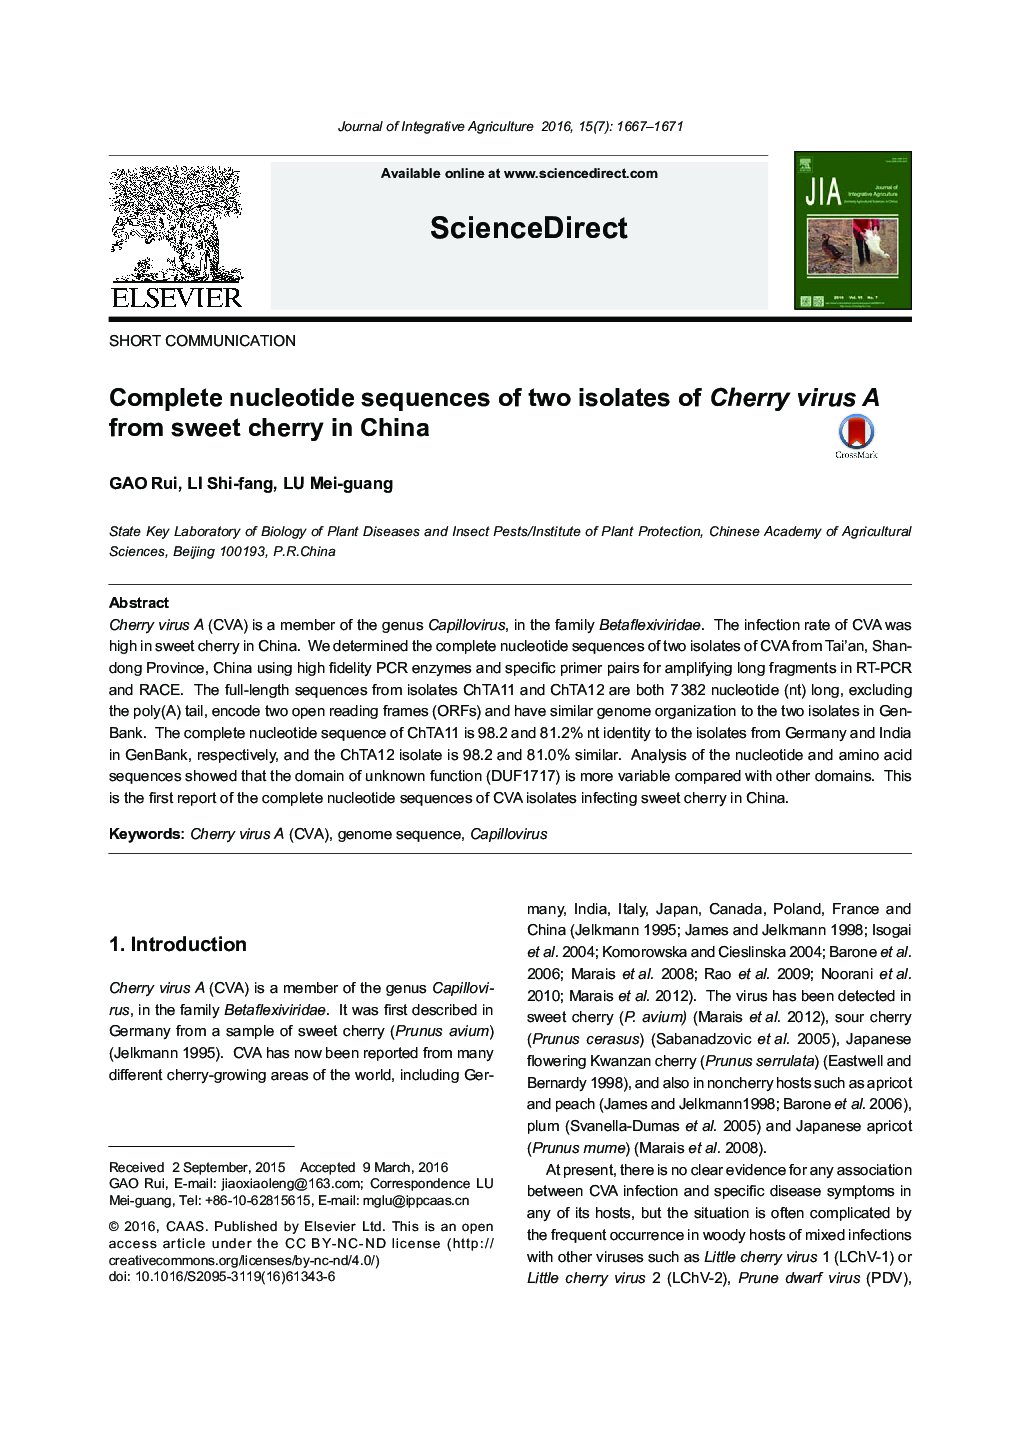 Complete nucleotide sequences of two isolates of Cherry virus A from sweet cherry in China